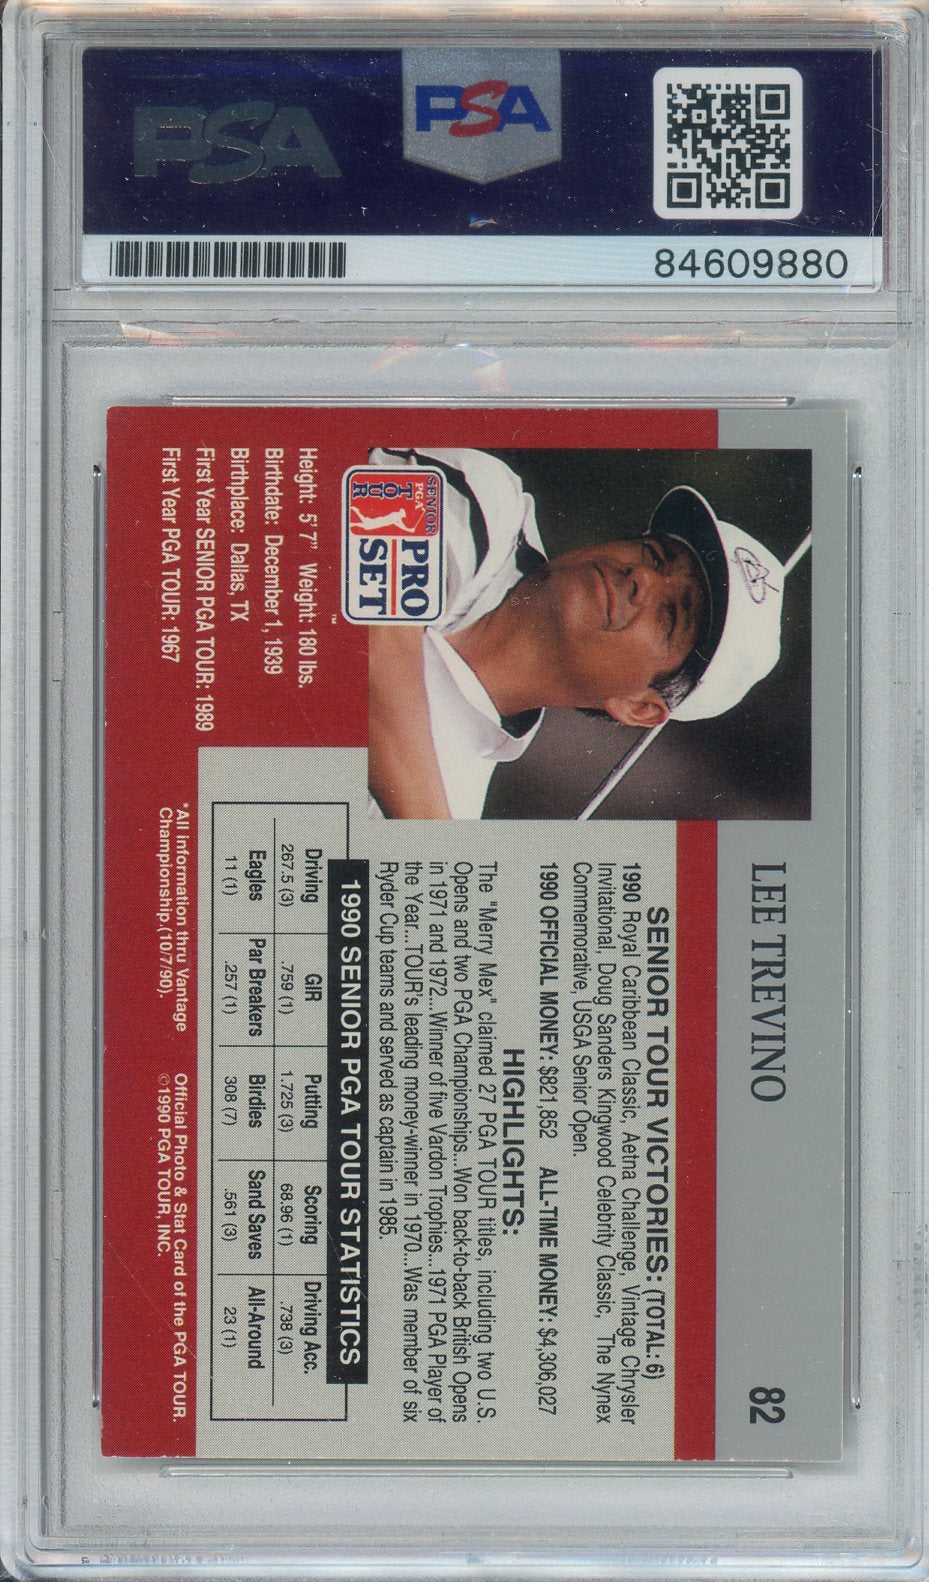 LEE TREVINO SIGNED PSA/DNA CERTIFIED AUTHENTIC AUTOGRAPH CARD